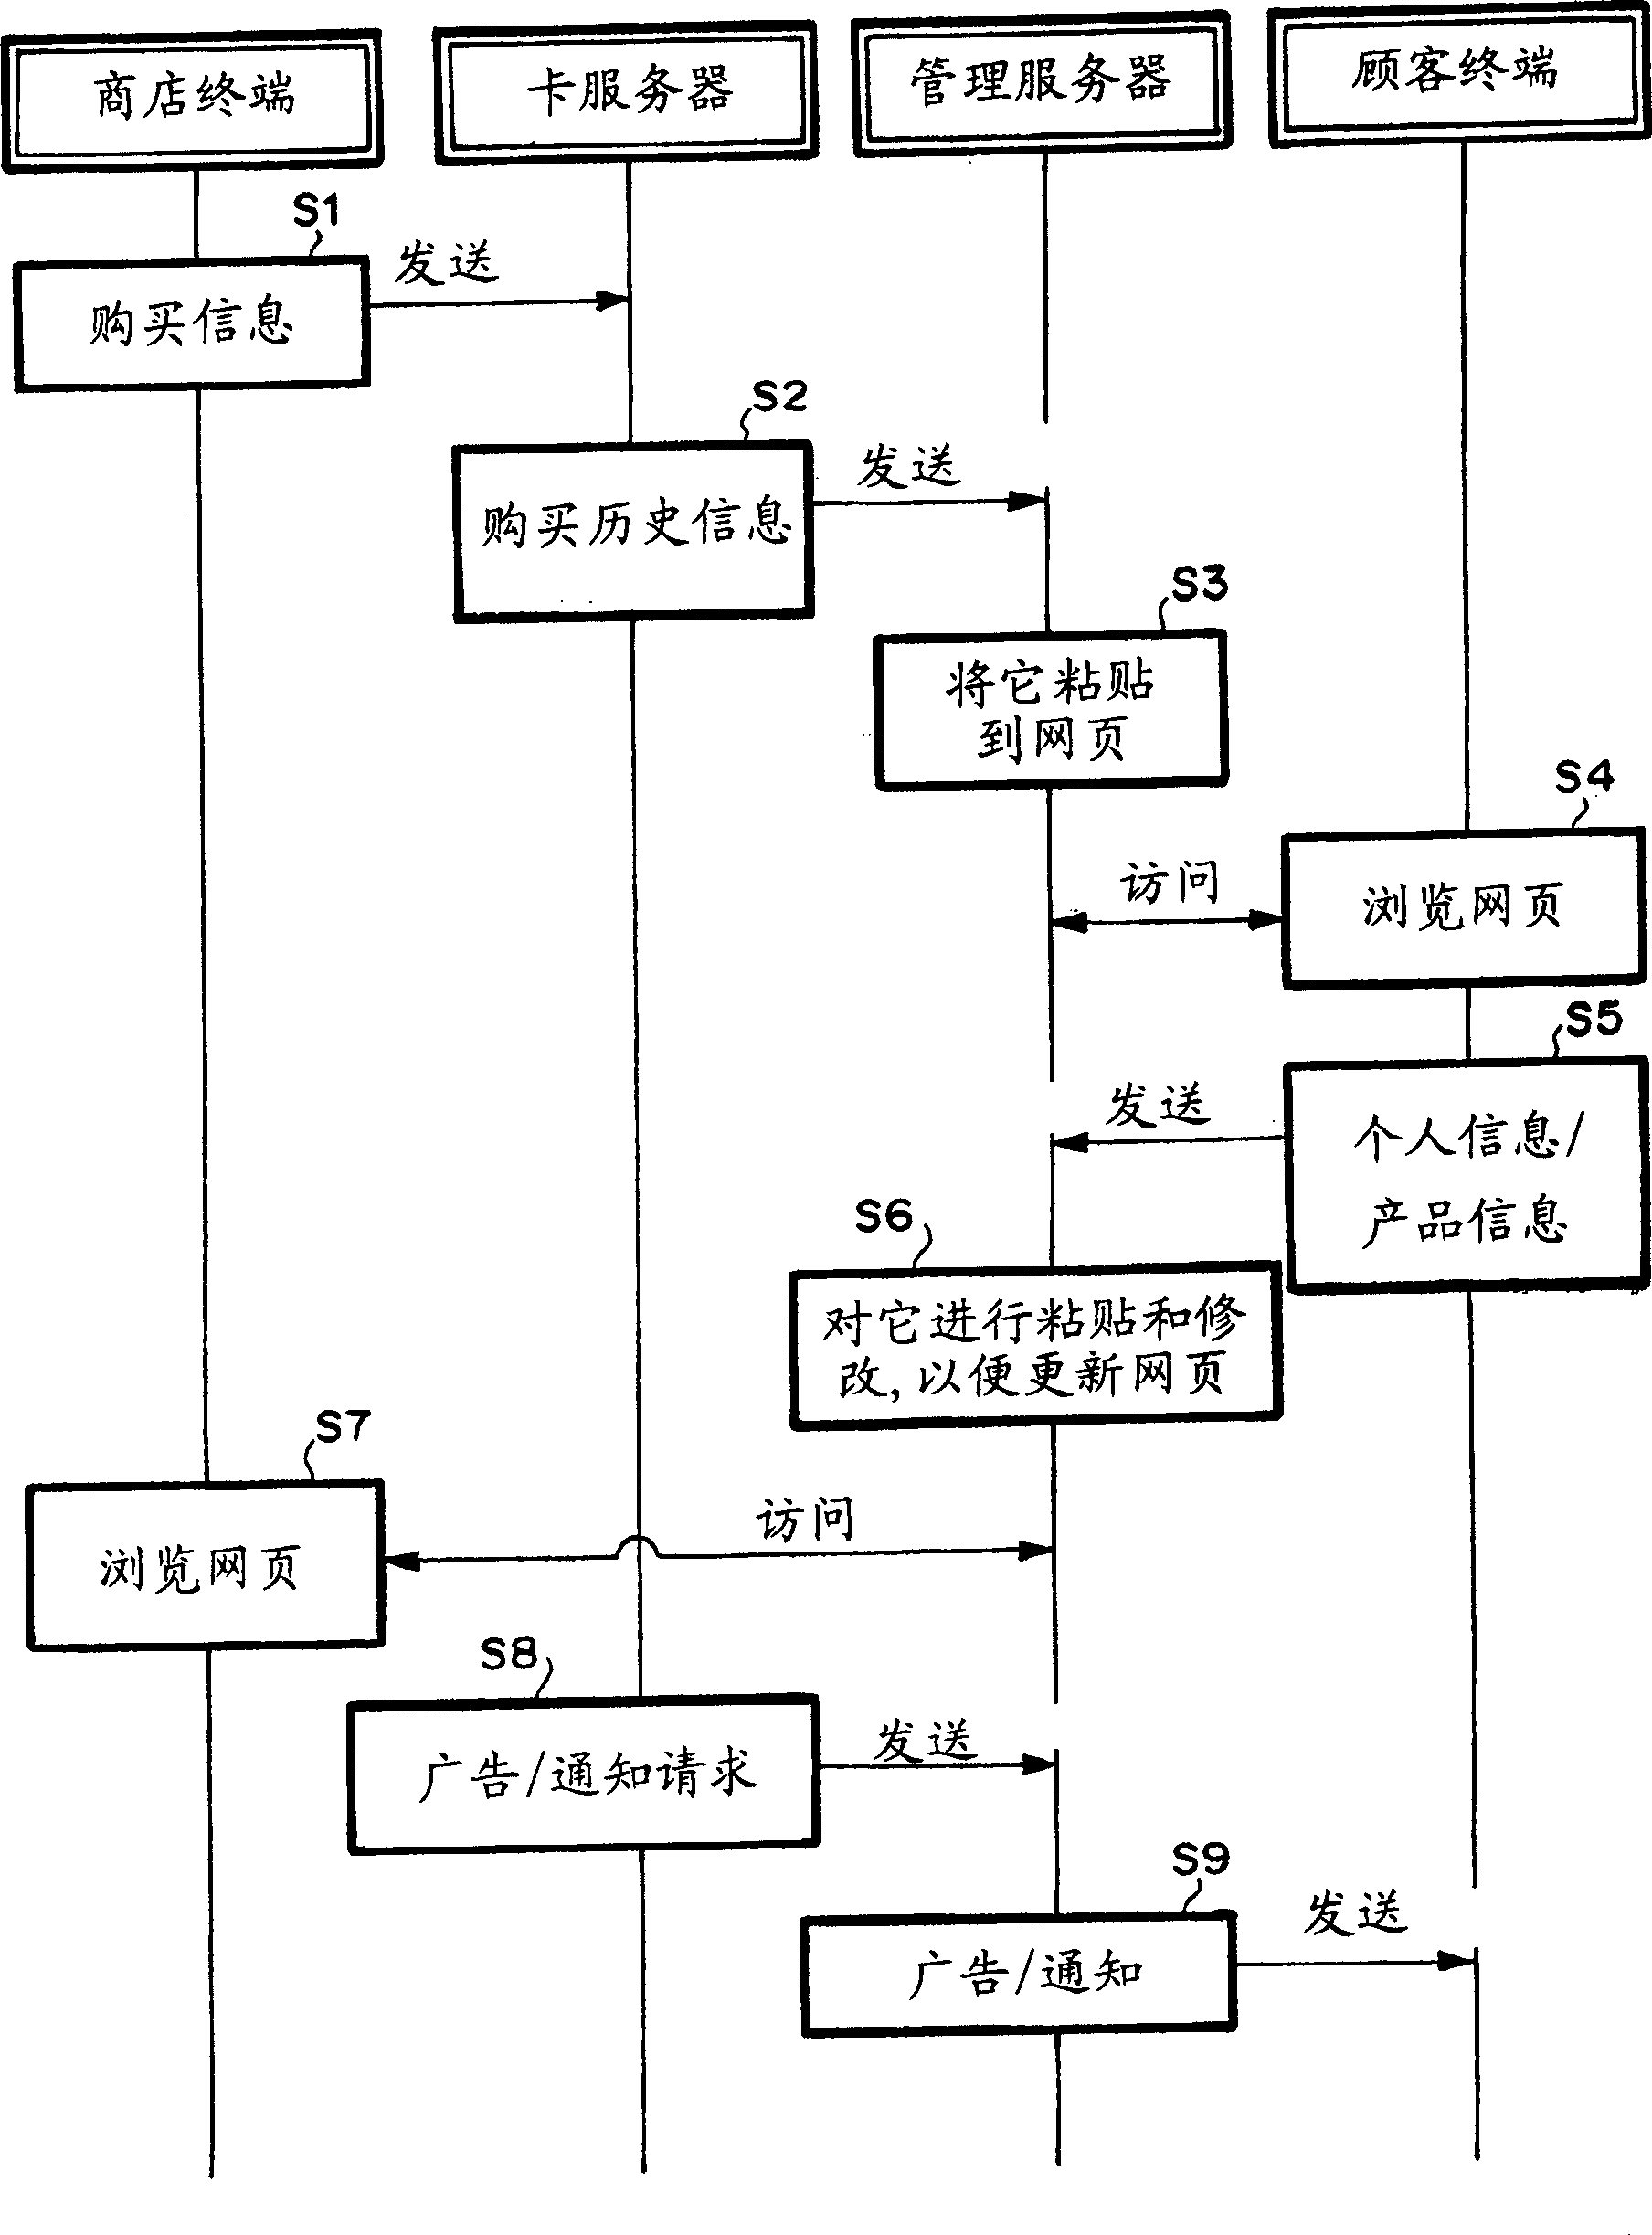 Card information chaining chaining system and method